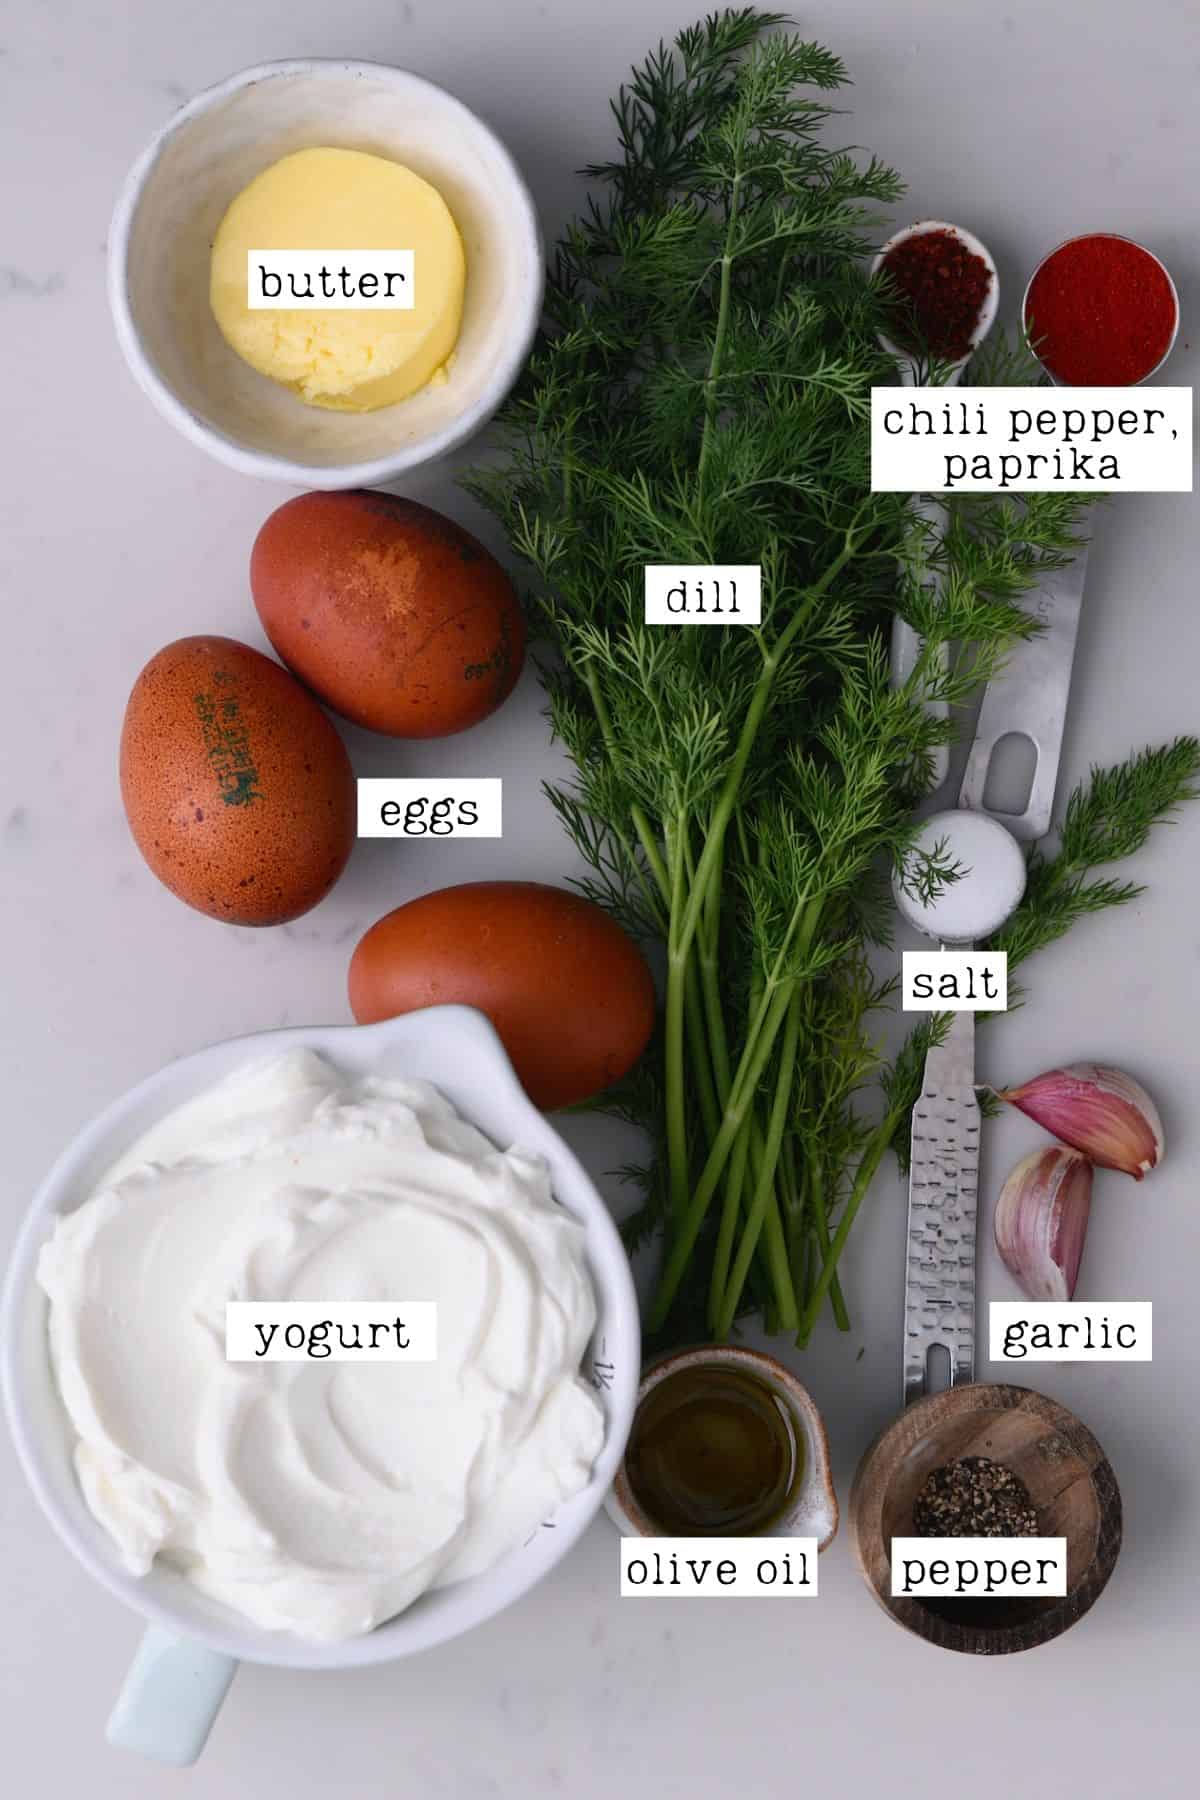 Ingredients for Turkish poached eggs